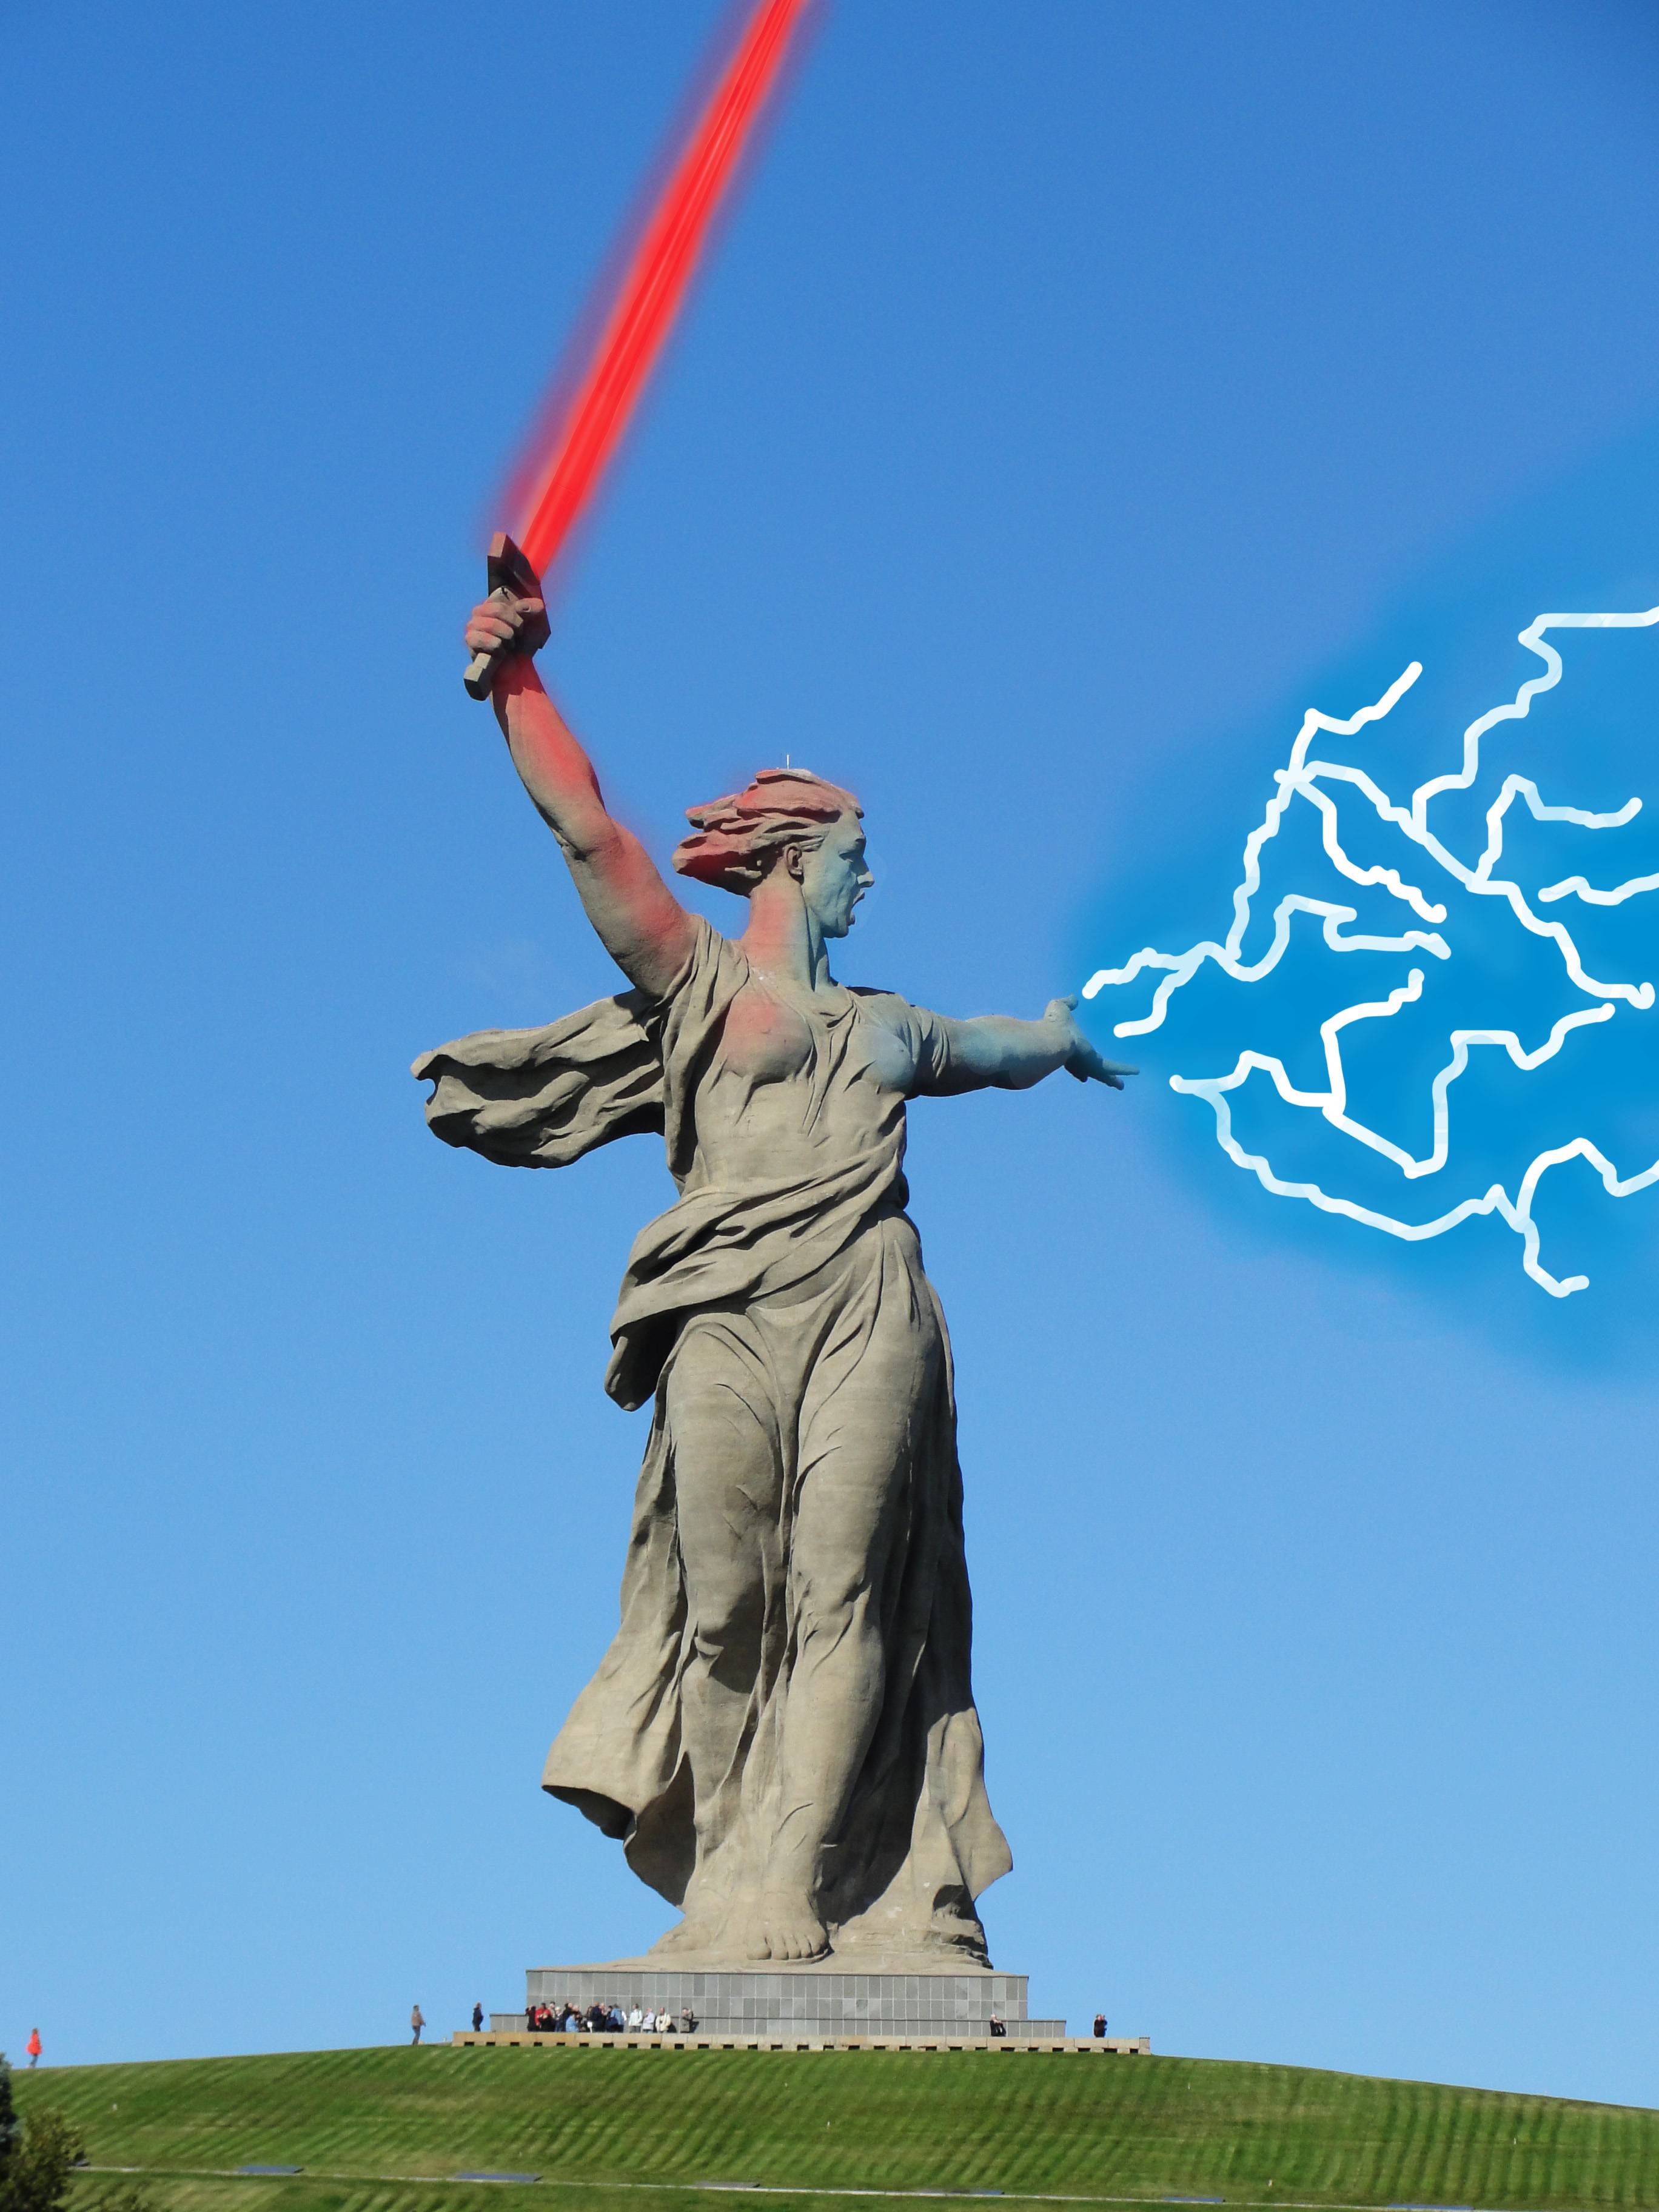 Giant statue in Russia (The motherland calls) : photoshopbattles